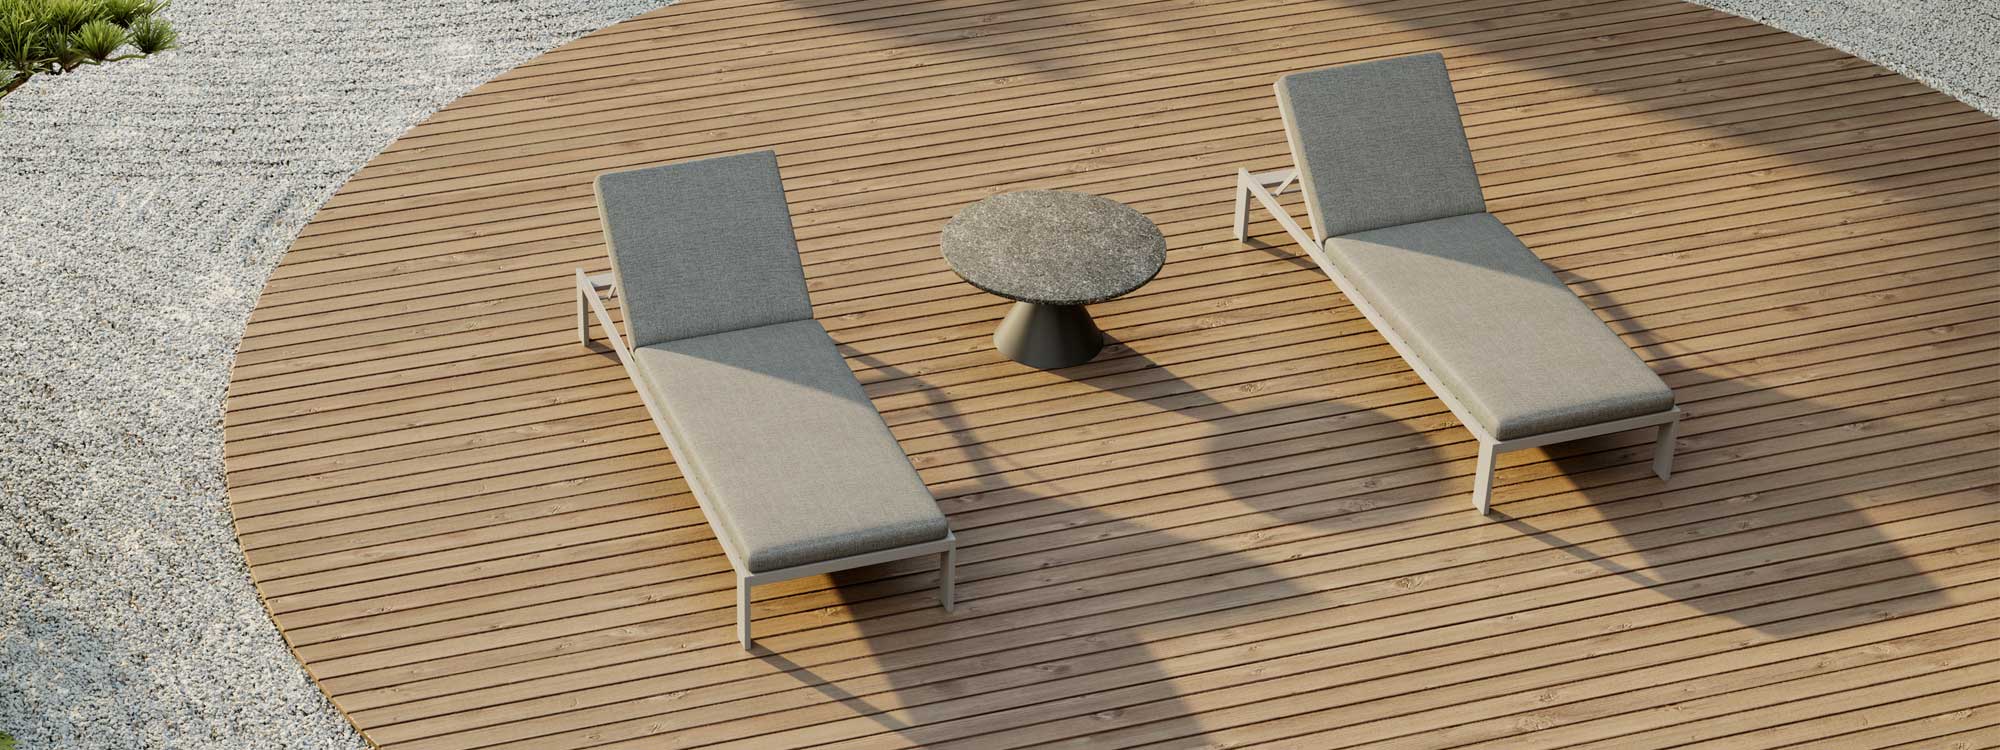 Image of pair of Beam Aluminium sun loungers on circular wooden deck with Drums modern low table in the centre, surrounded by carefully raked gravel in Japanese style